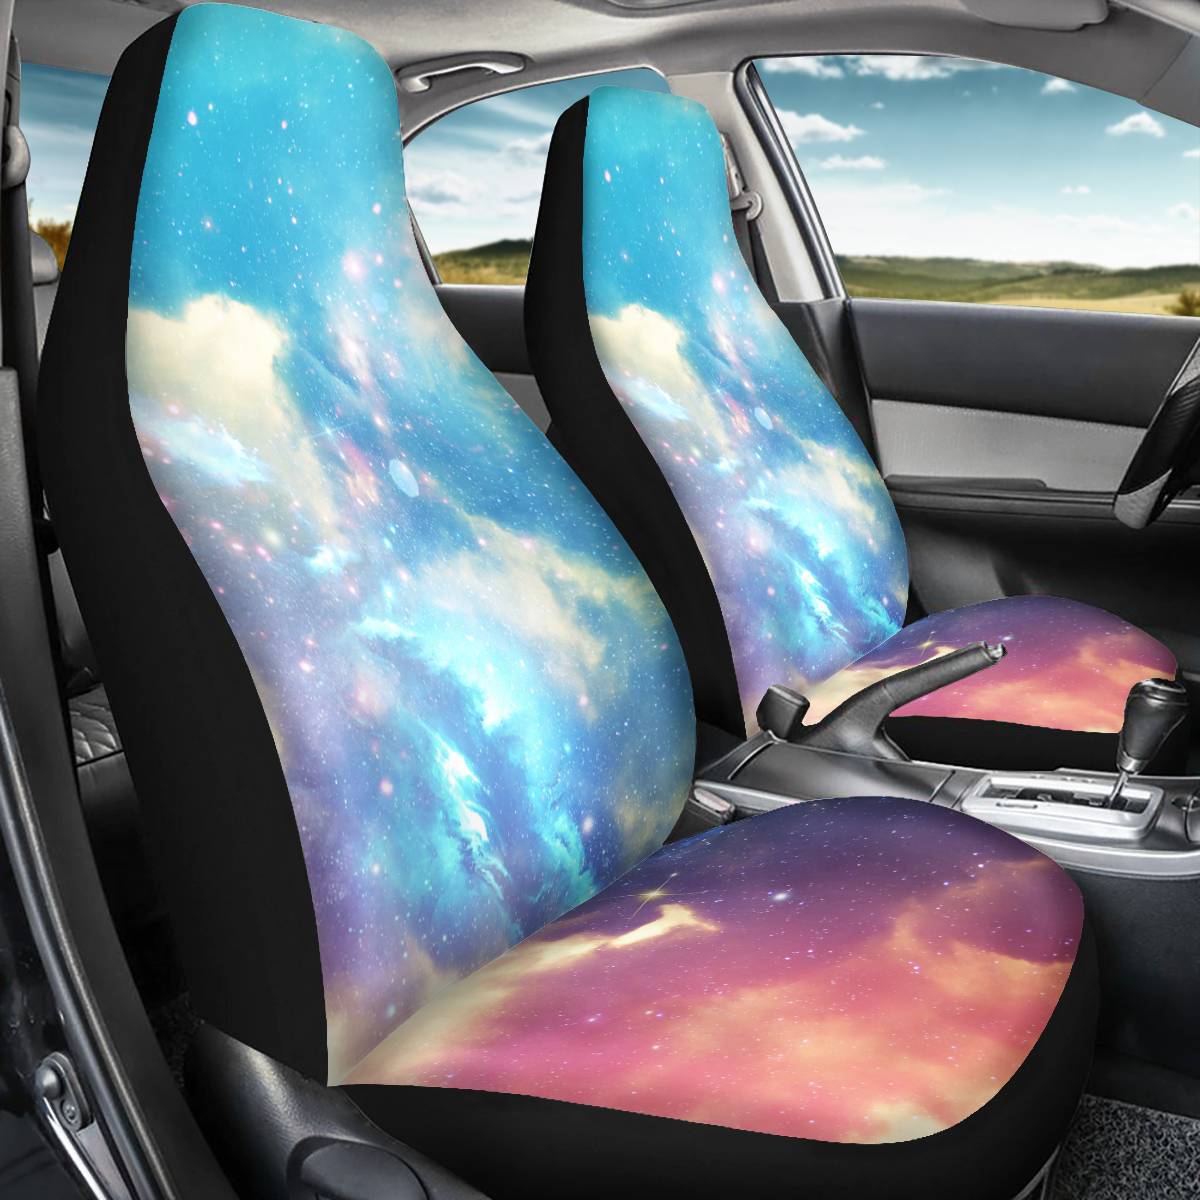 2PCS Front Seat Covers Star Printing Universal Fit Seat Covers Will Stretch to Fit Most Car and SUV Bucket Style Seats